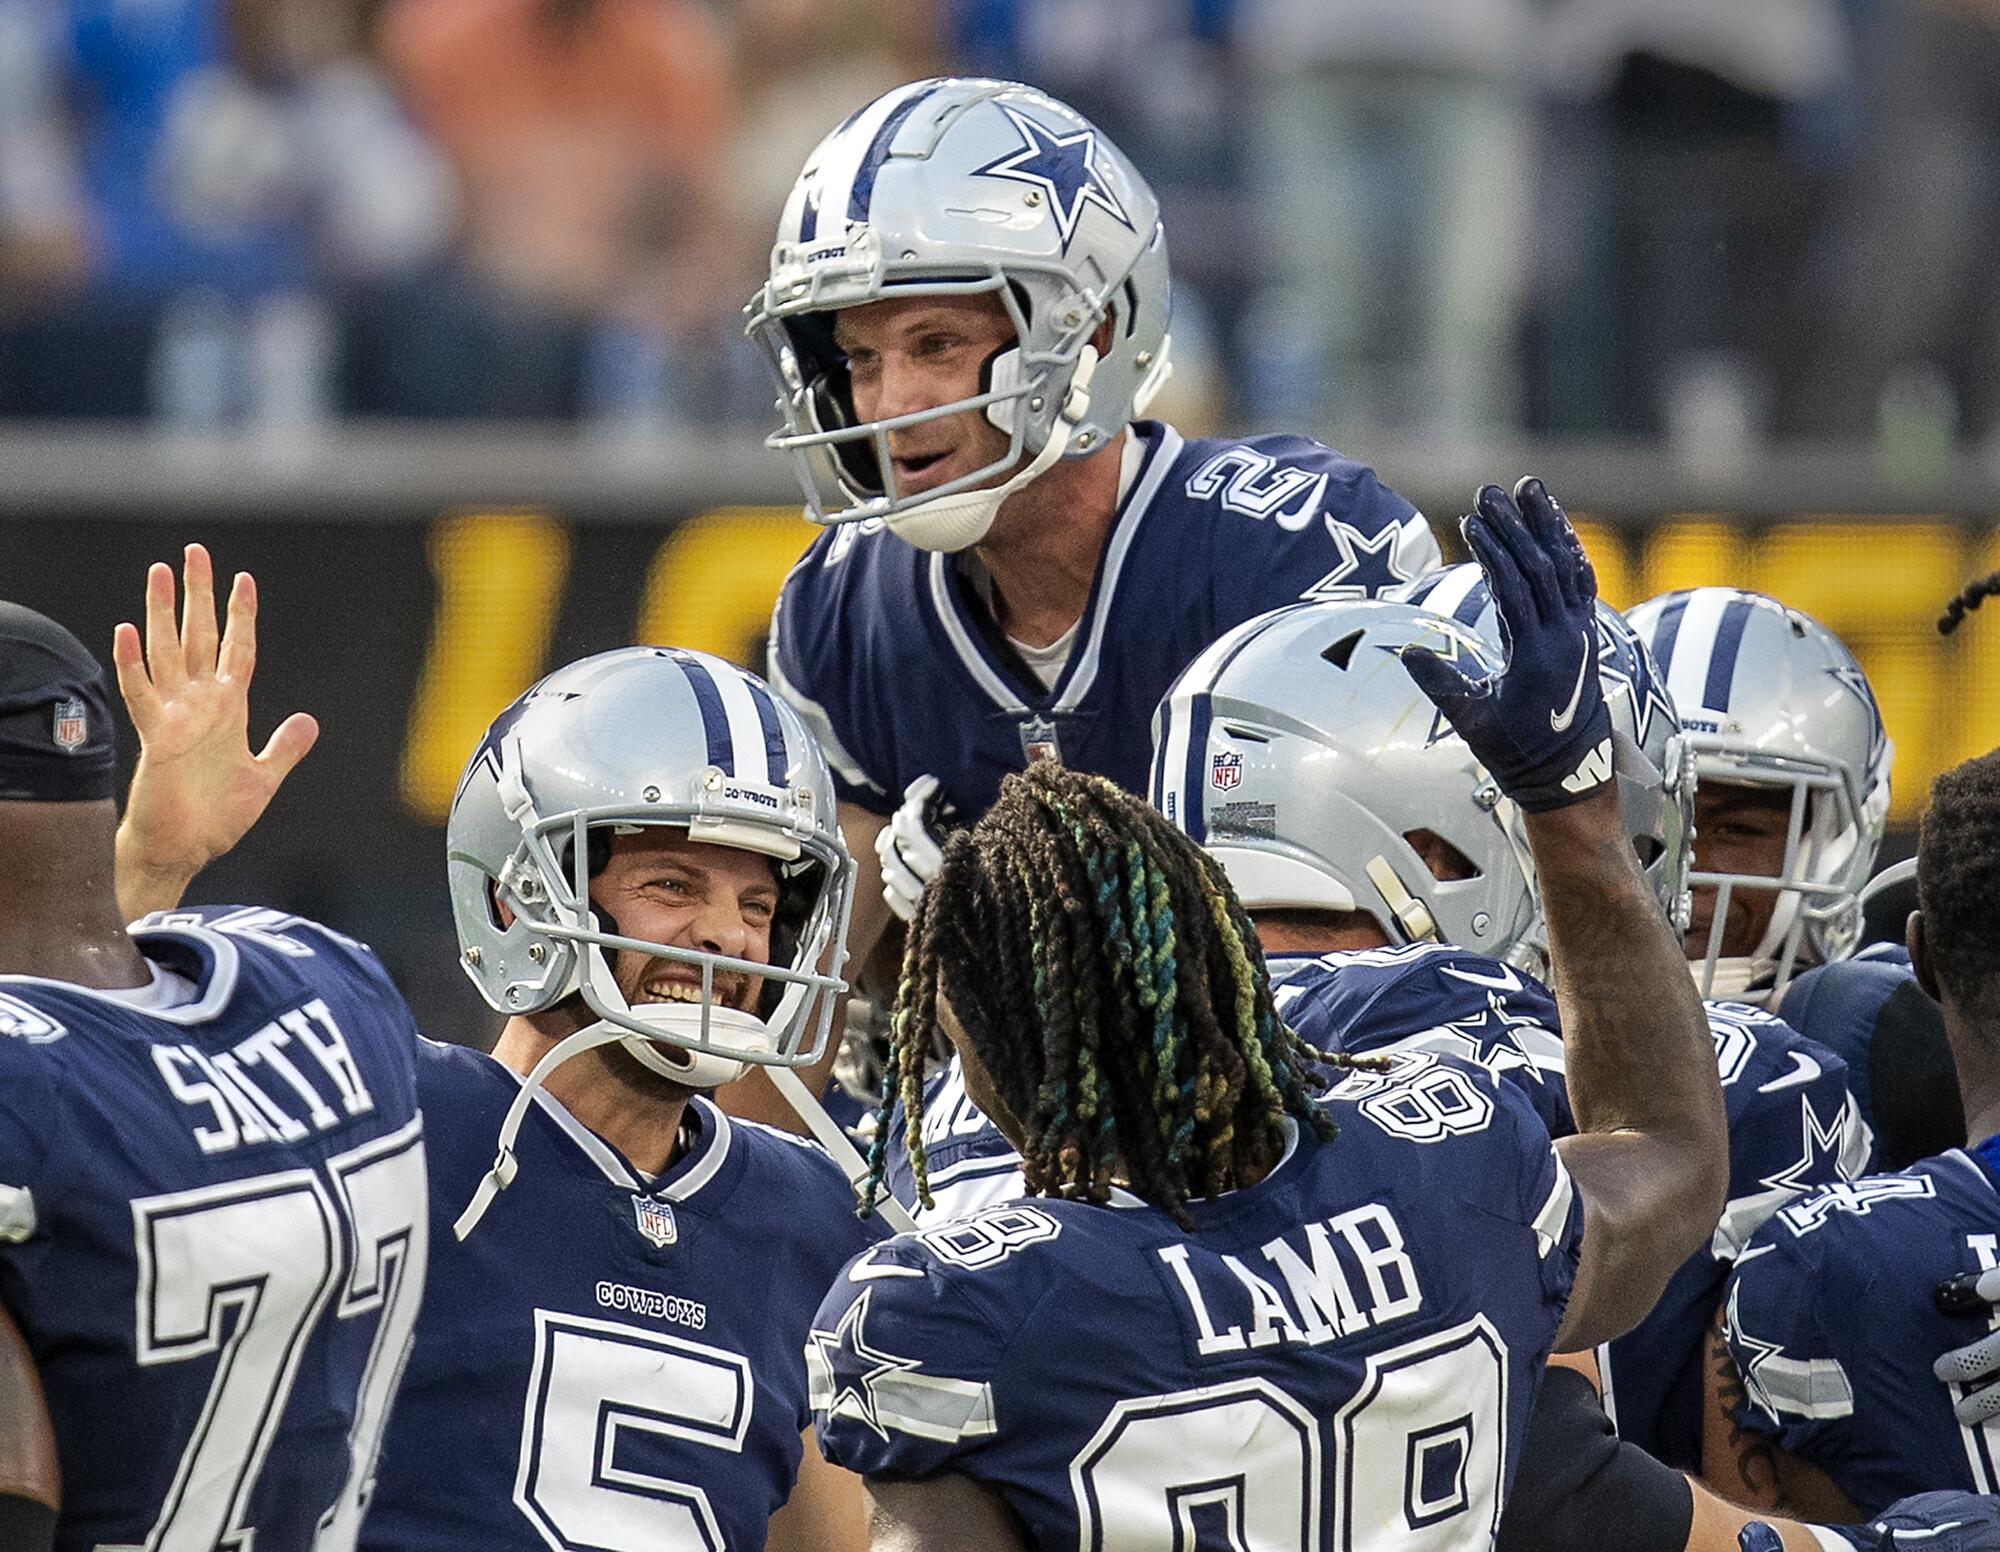 The Dallas Cowboys celebrate and hoist kicker Greg Zuerlein off the field after his 56-yard field goal.